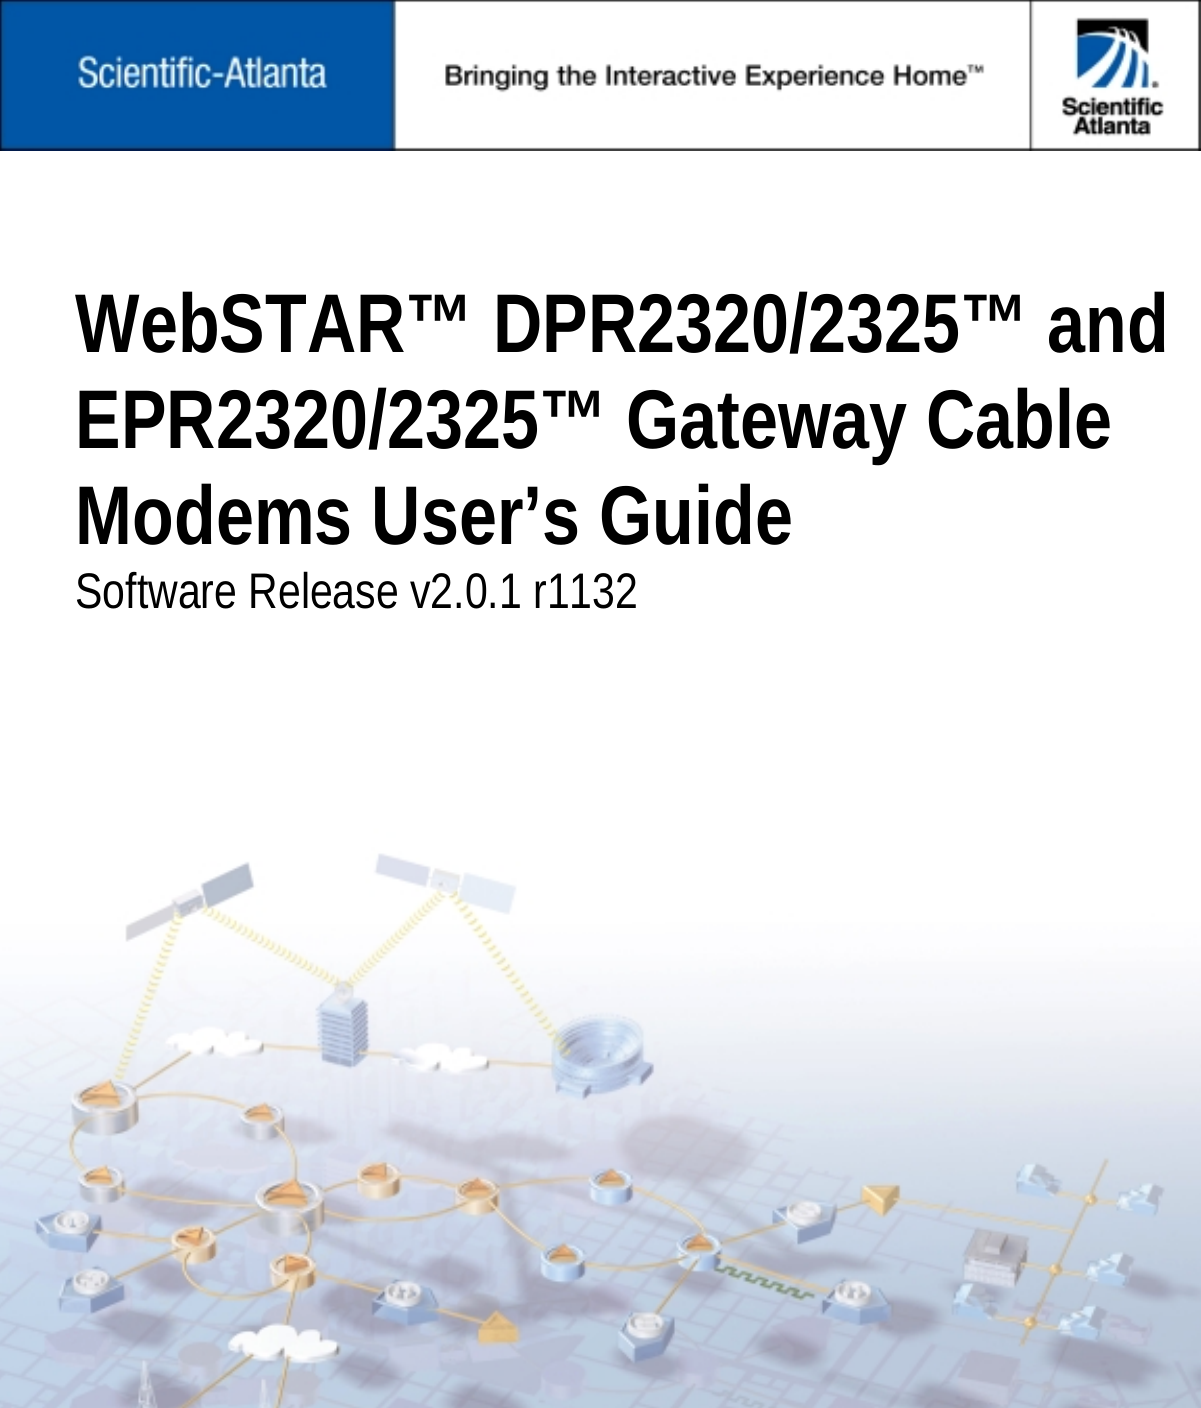   WebSTAR™ DPR2320/2325™ and EPR2320/2325™ Gateway Cable Modems User’s Guide Software Release v2.0.1 r1132 